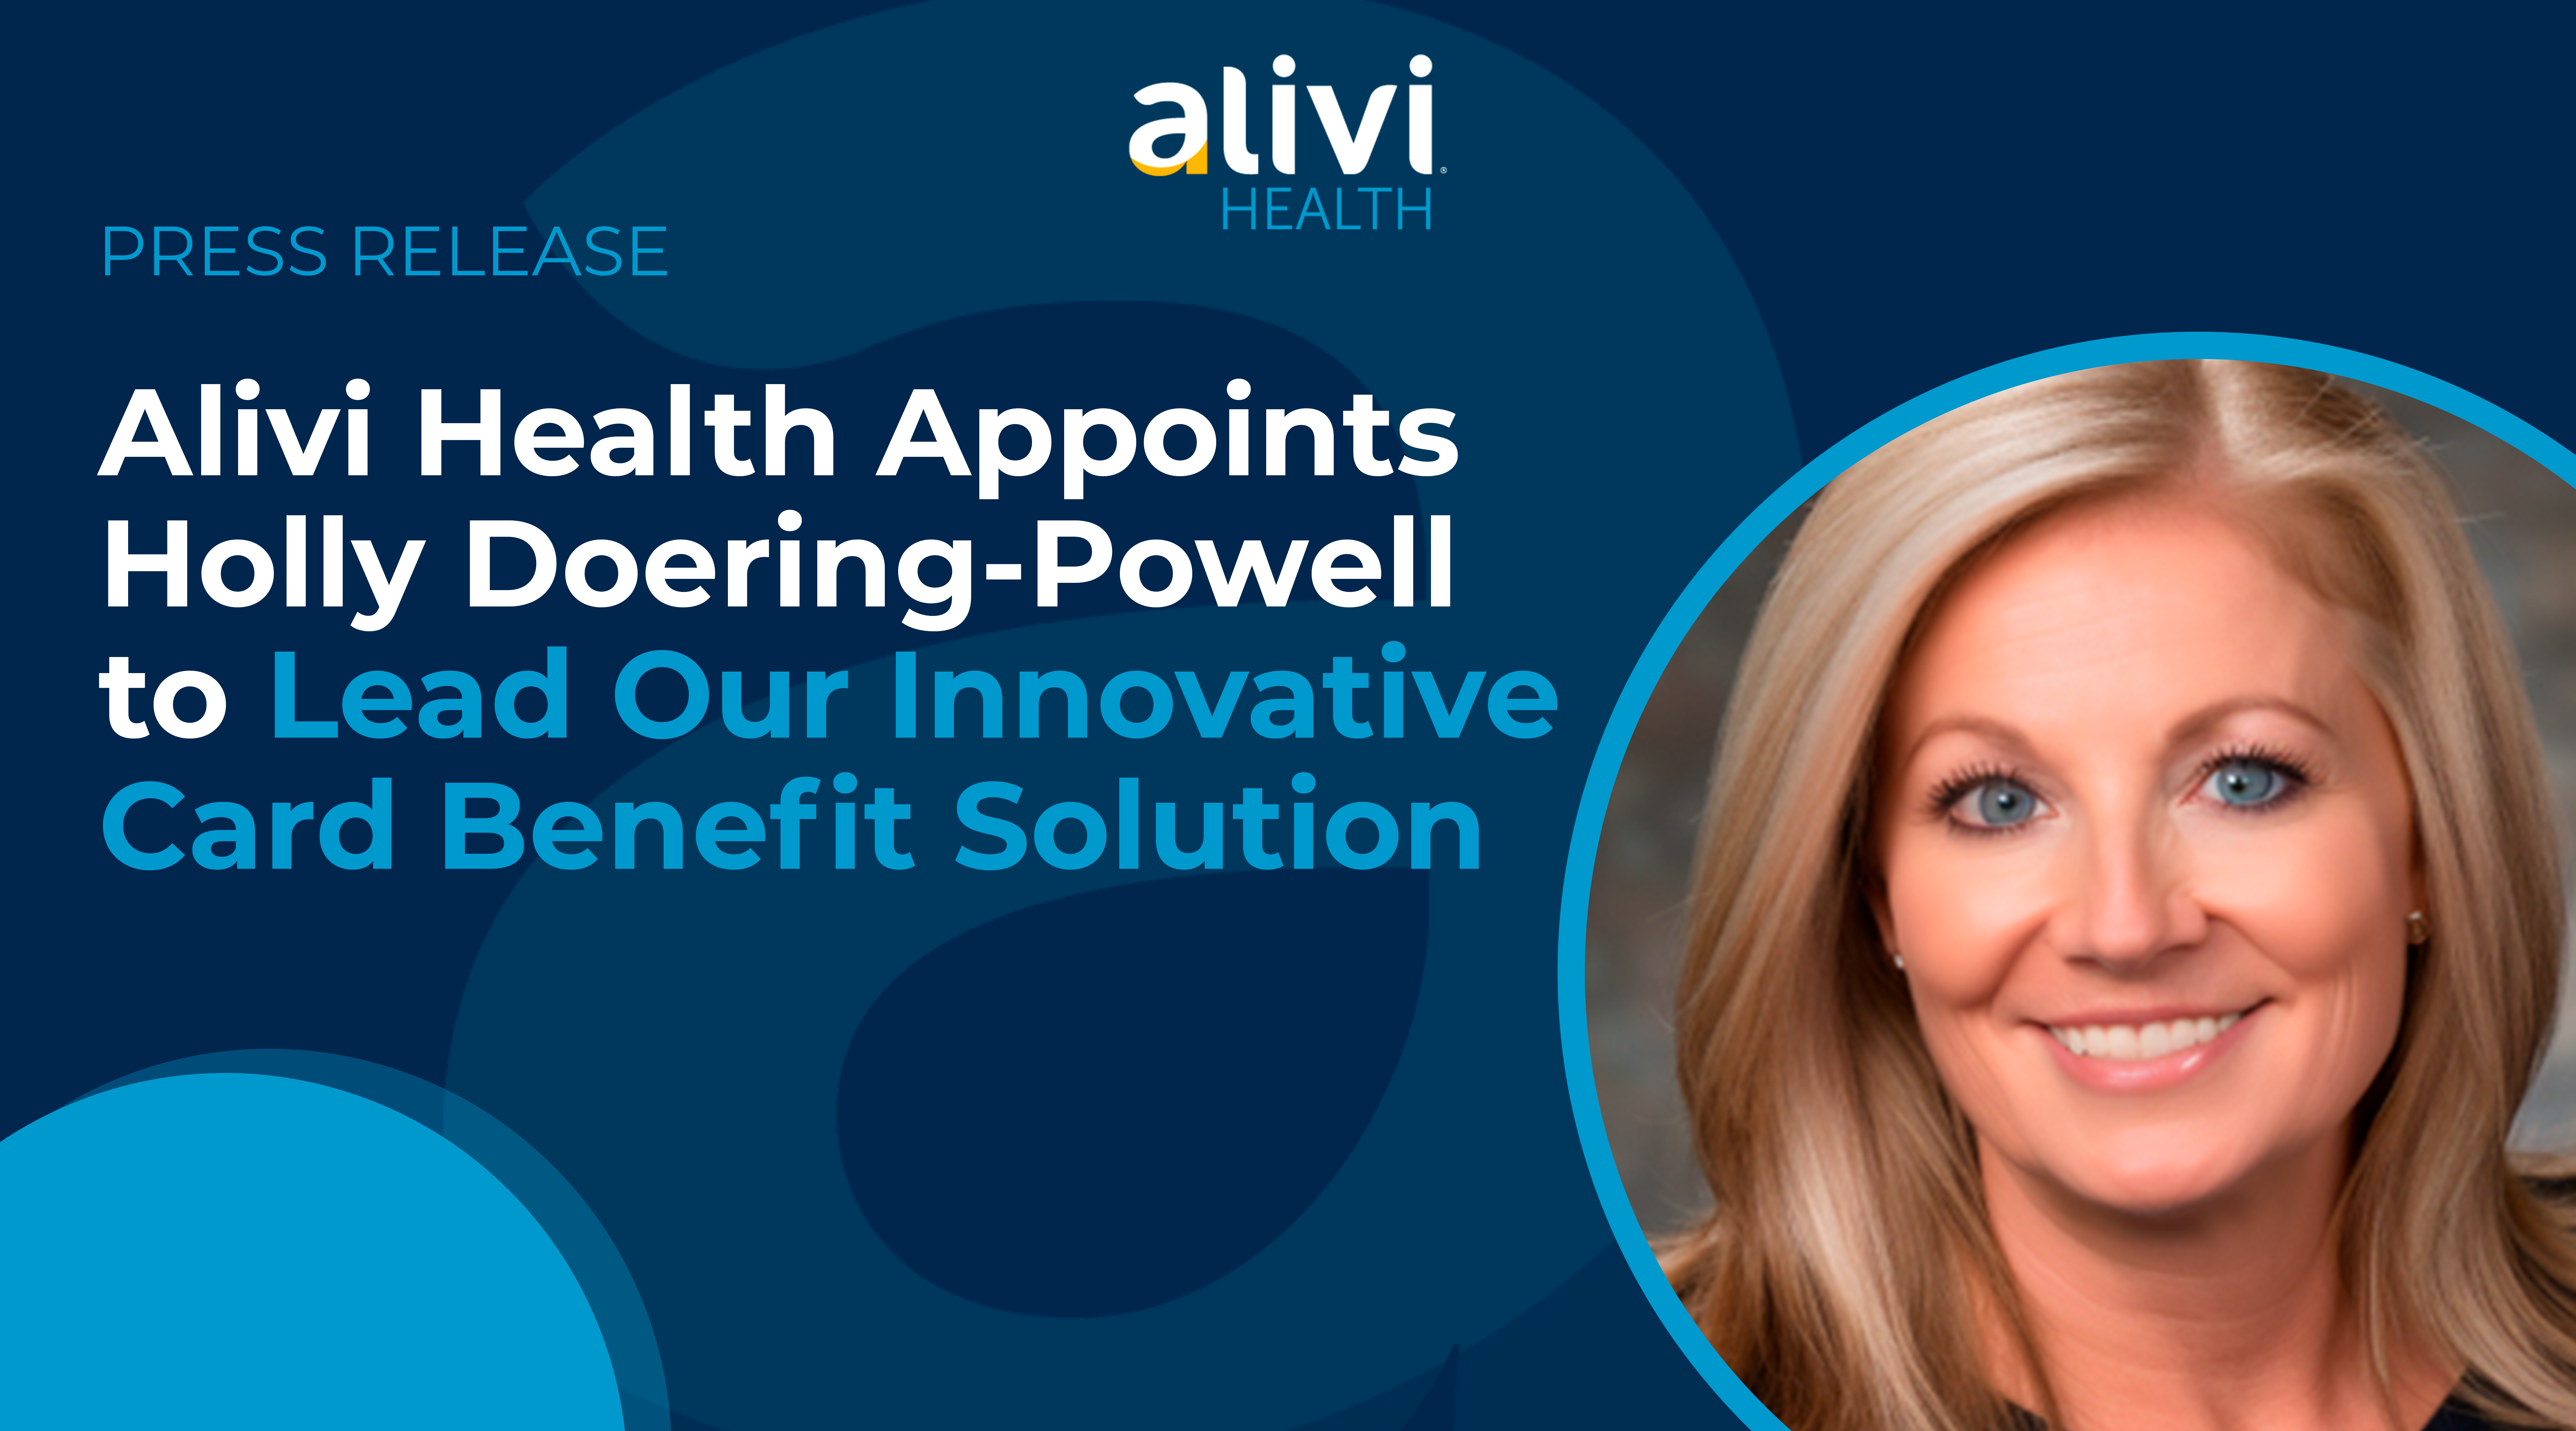 Holly Doering-Powell to Lead Alivi Health's Innovative Card Benefit Solution